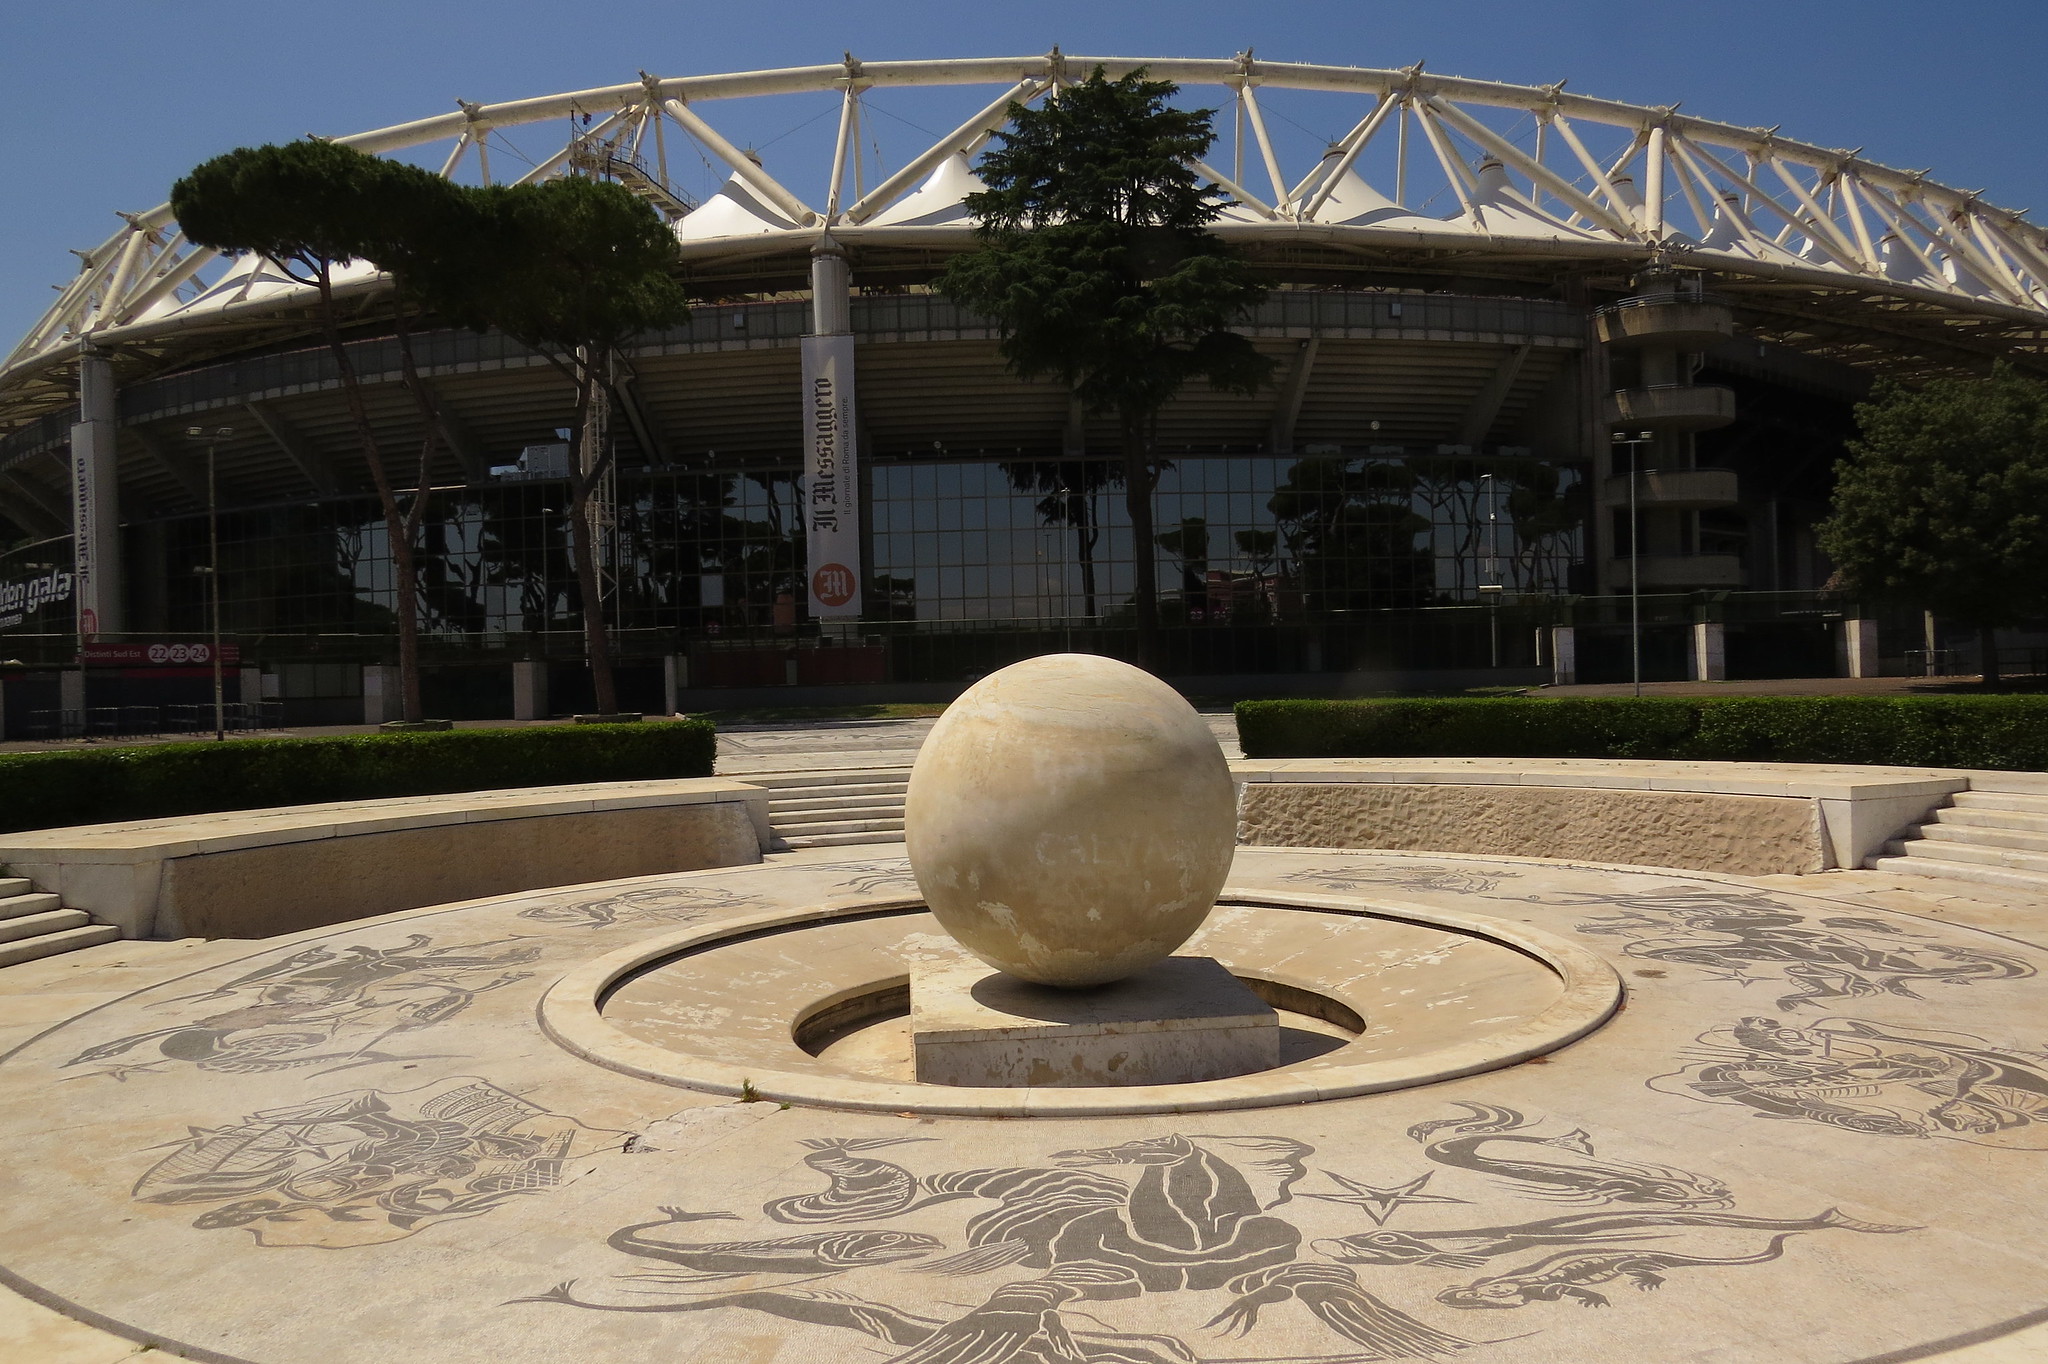 Stadio Olimpico di Roma - also home of Lazio, and could be the home of Sergej Milinkovic-Savic